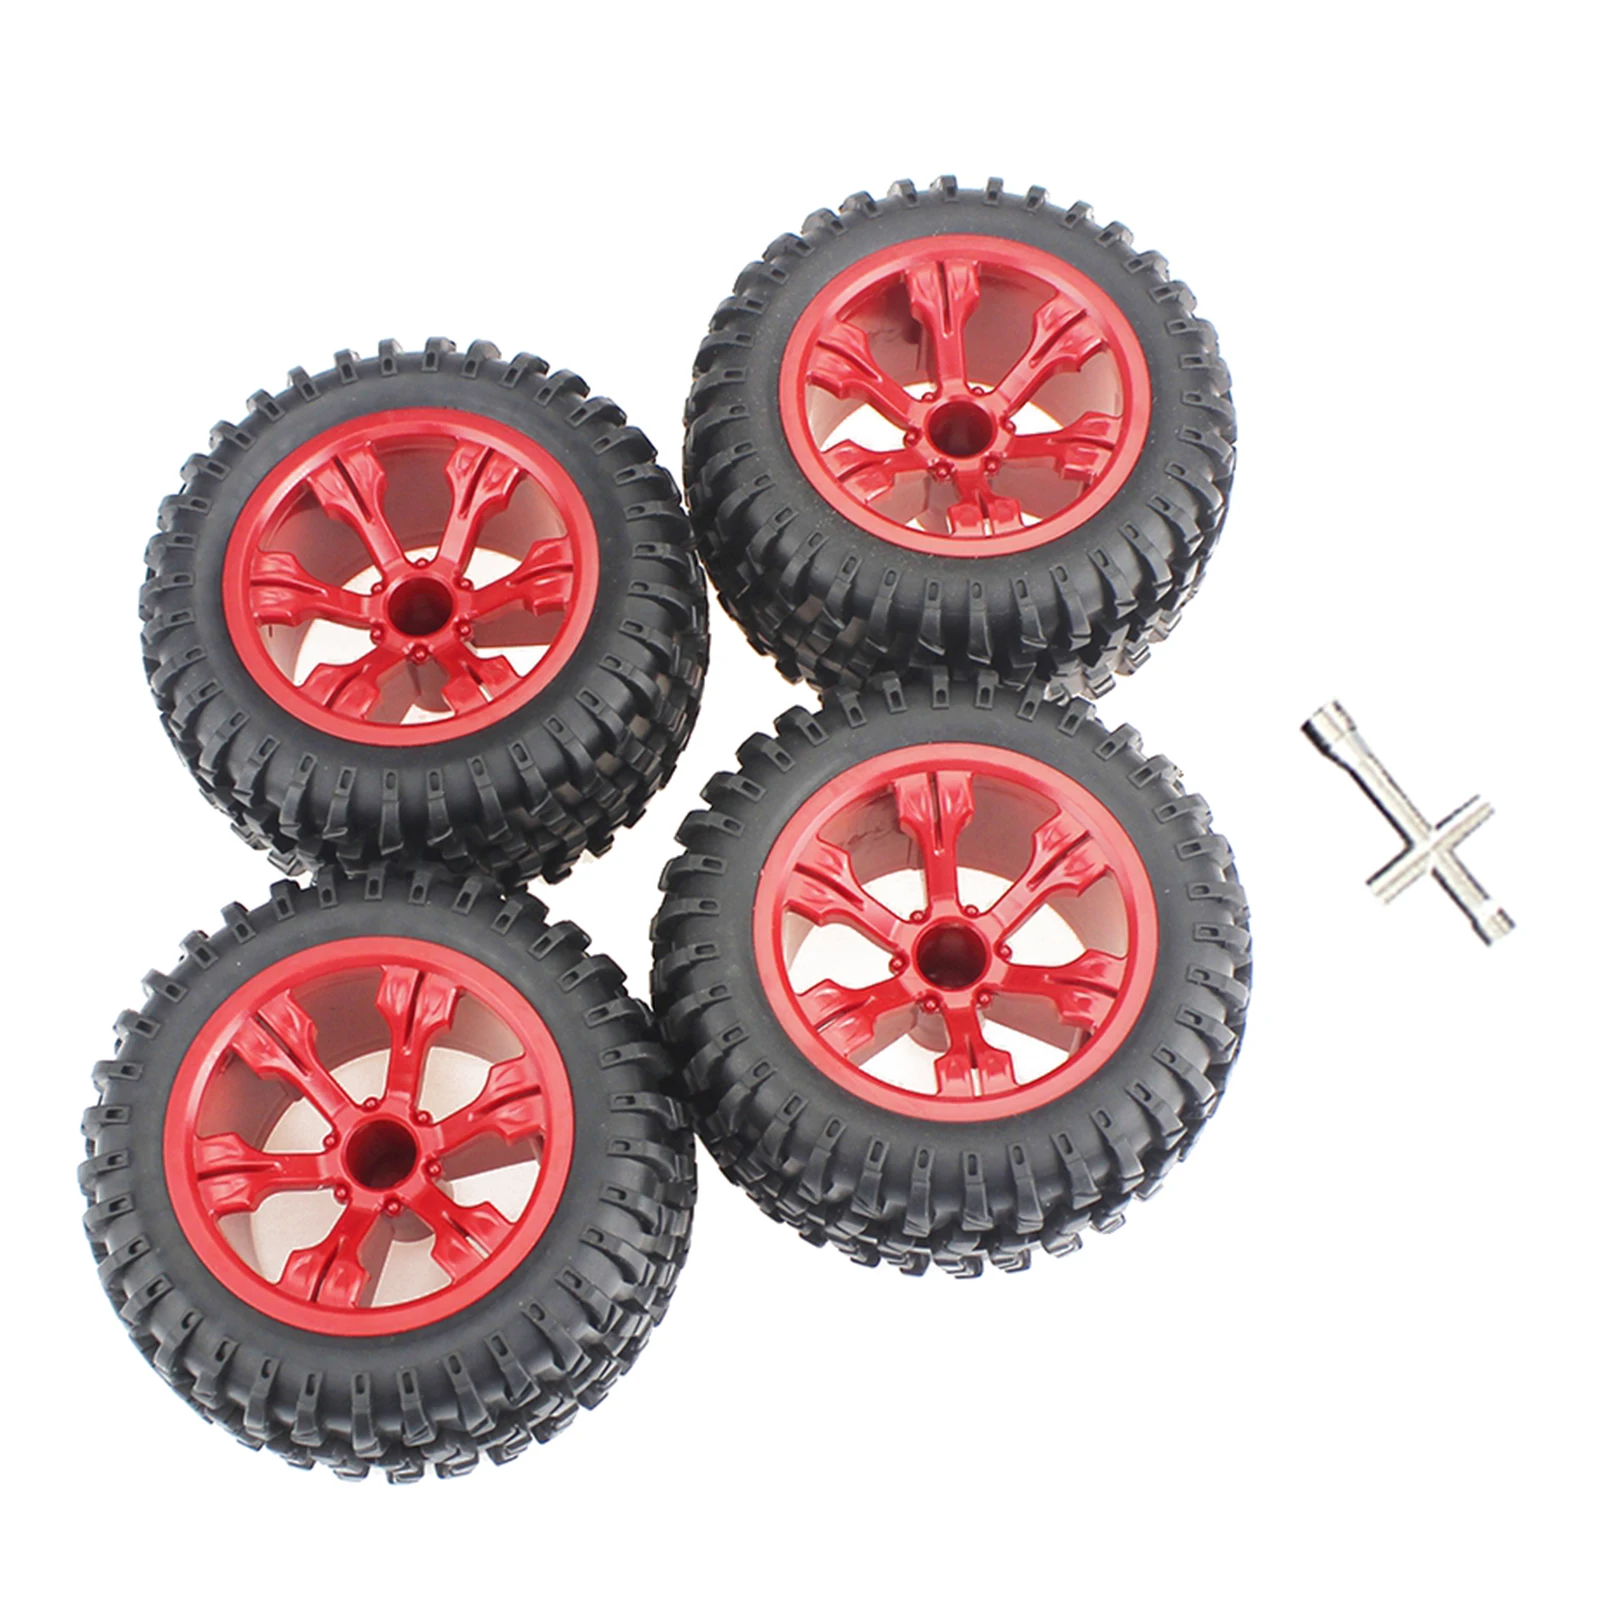 110mm Dia. Tyres Replacement for Wltoys 12428 12428-A 12428- 1/12 Scale RC Cars